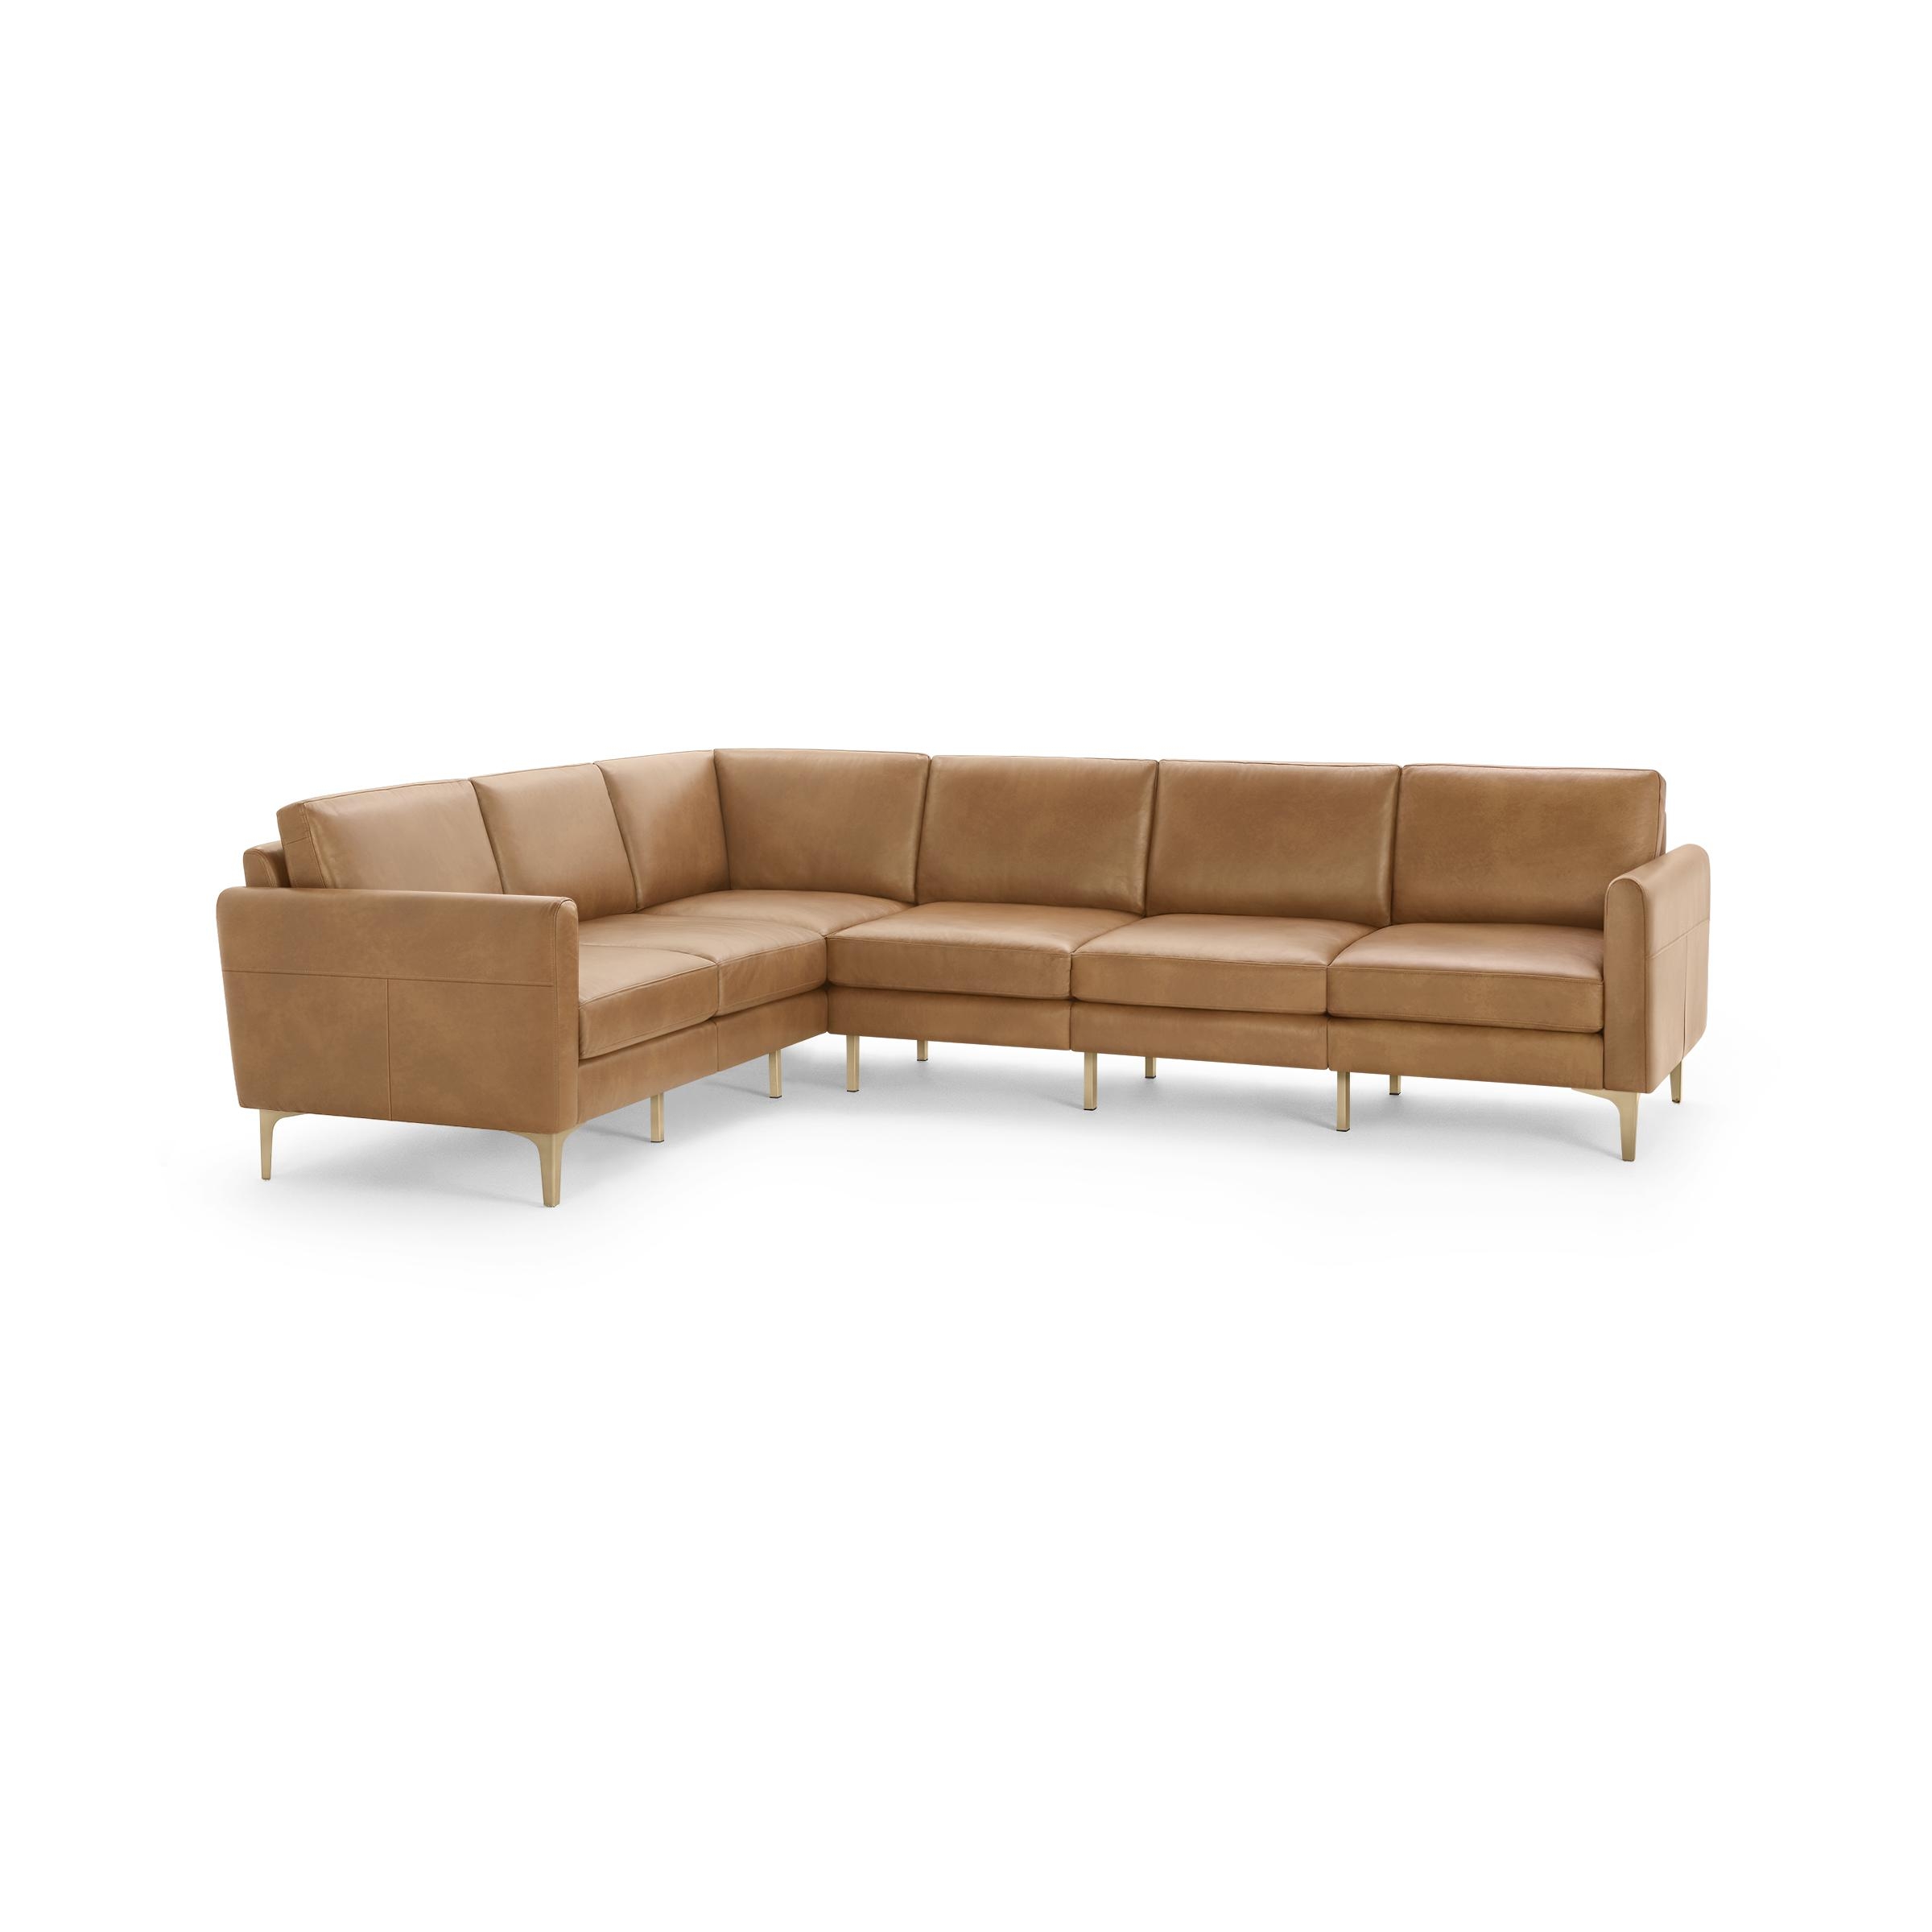 The Arch Nomad Leather 6-Seat Corner Sectional in Camel - Image 1